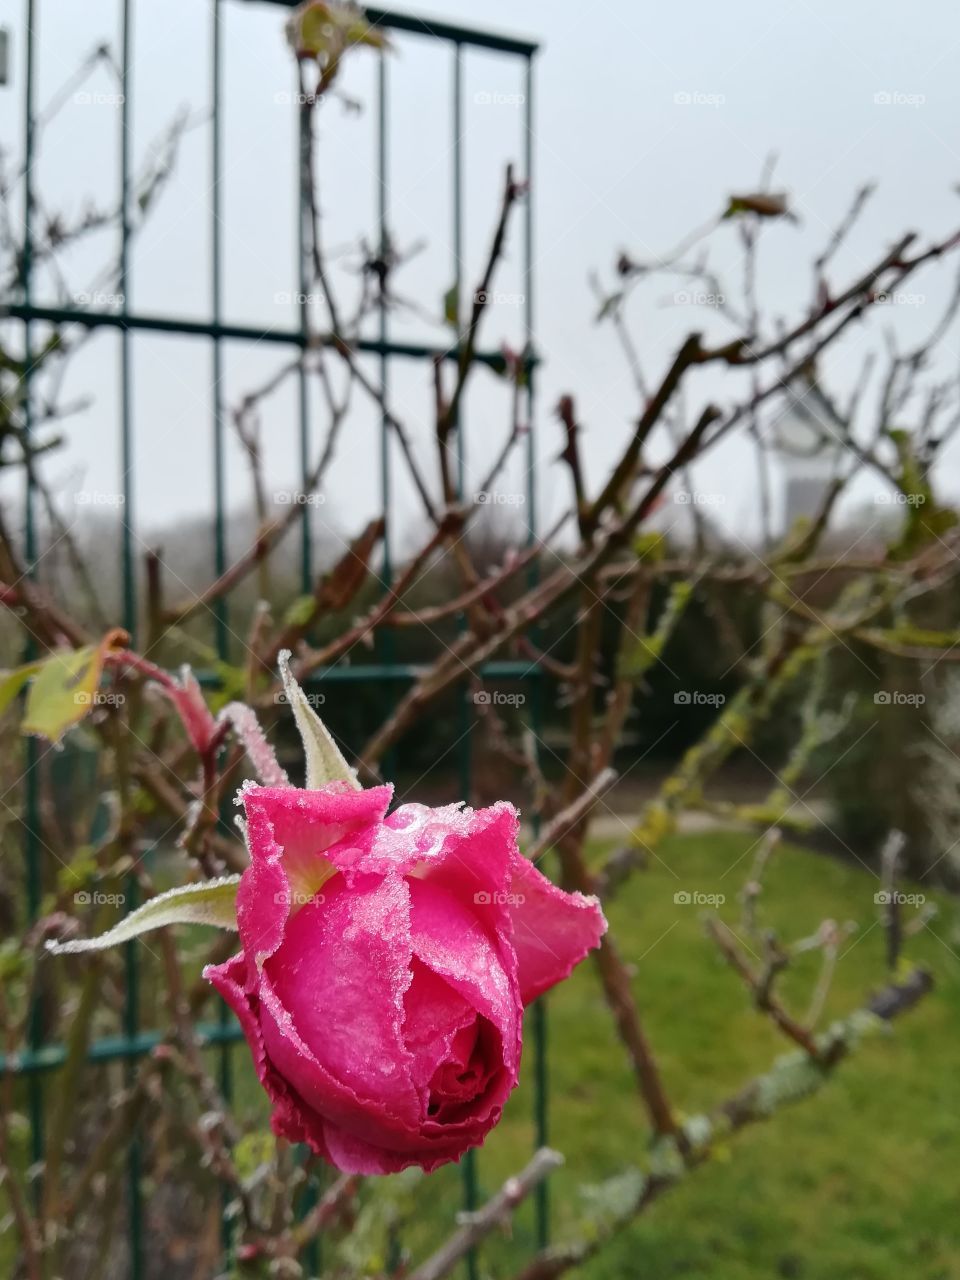 Iced rose in early spring